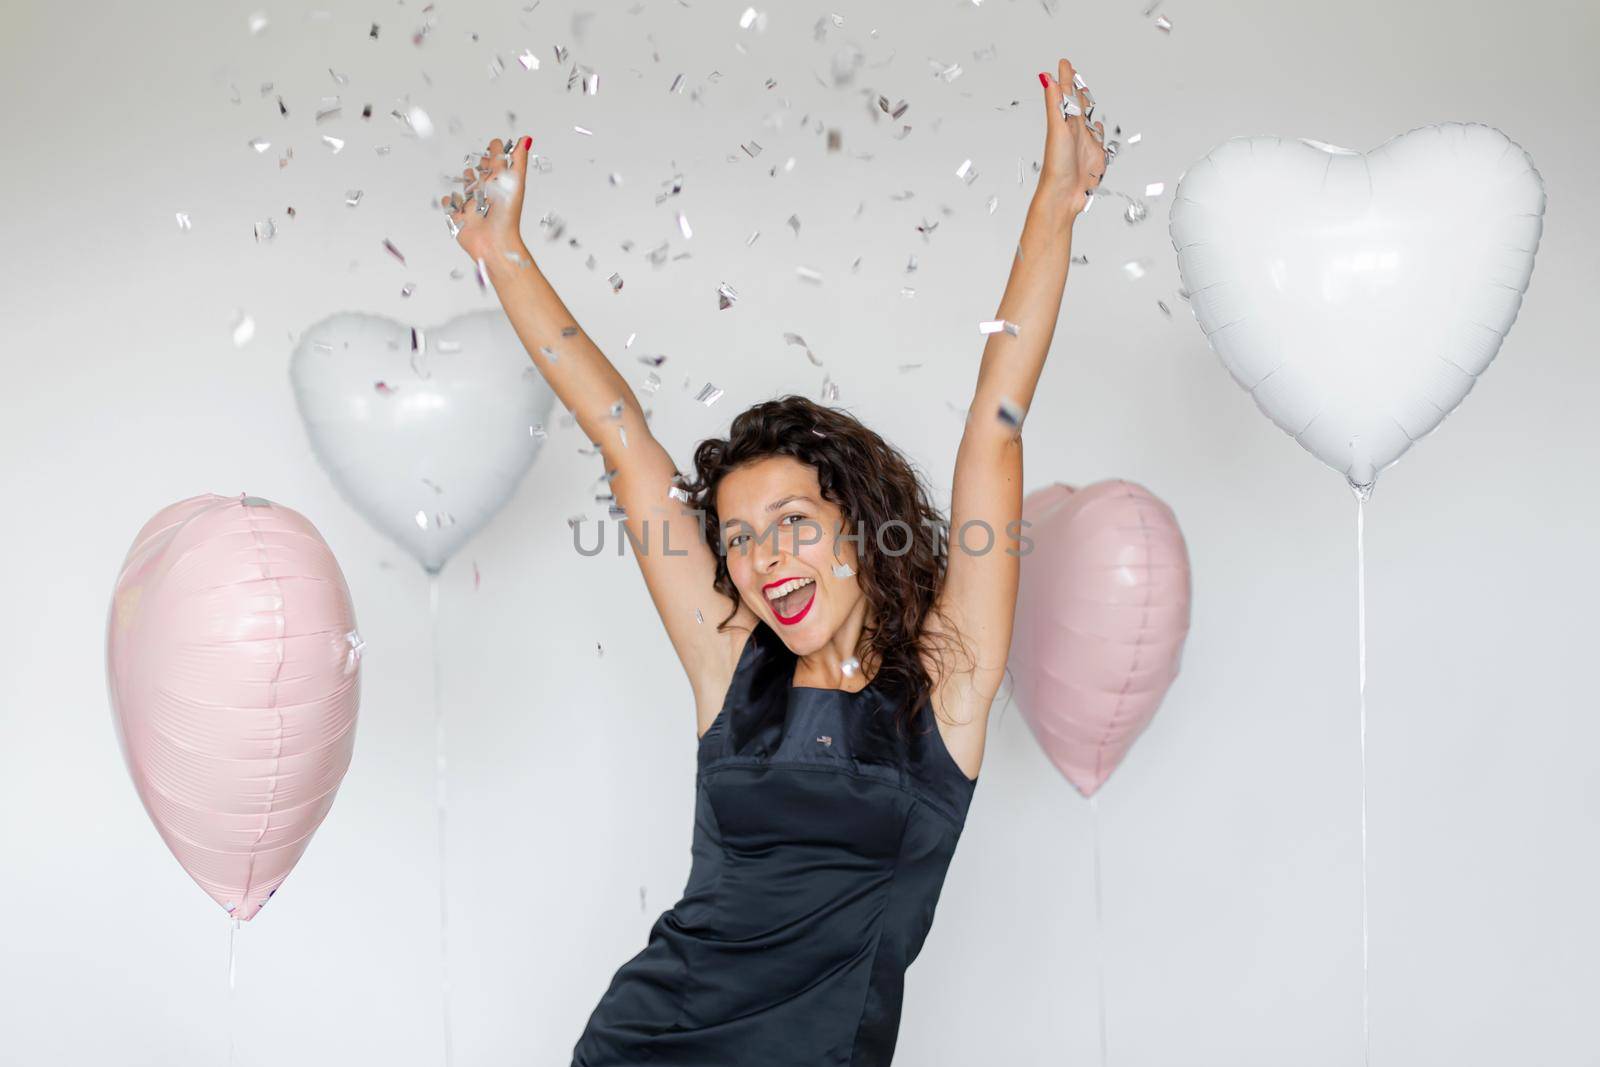 The emotion of success. Happy sexy brunette girl enjoying celebrating with confetti and heart balloons on a white background.